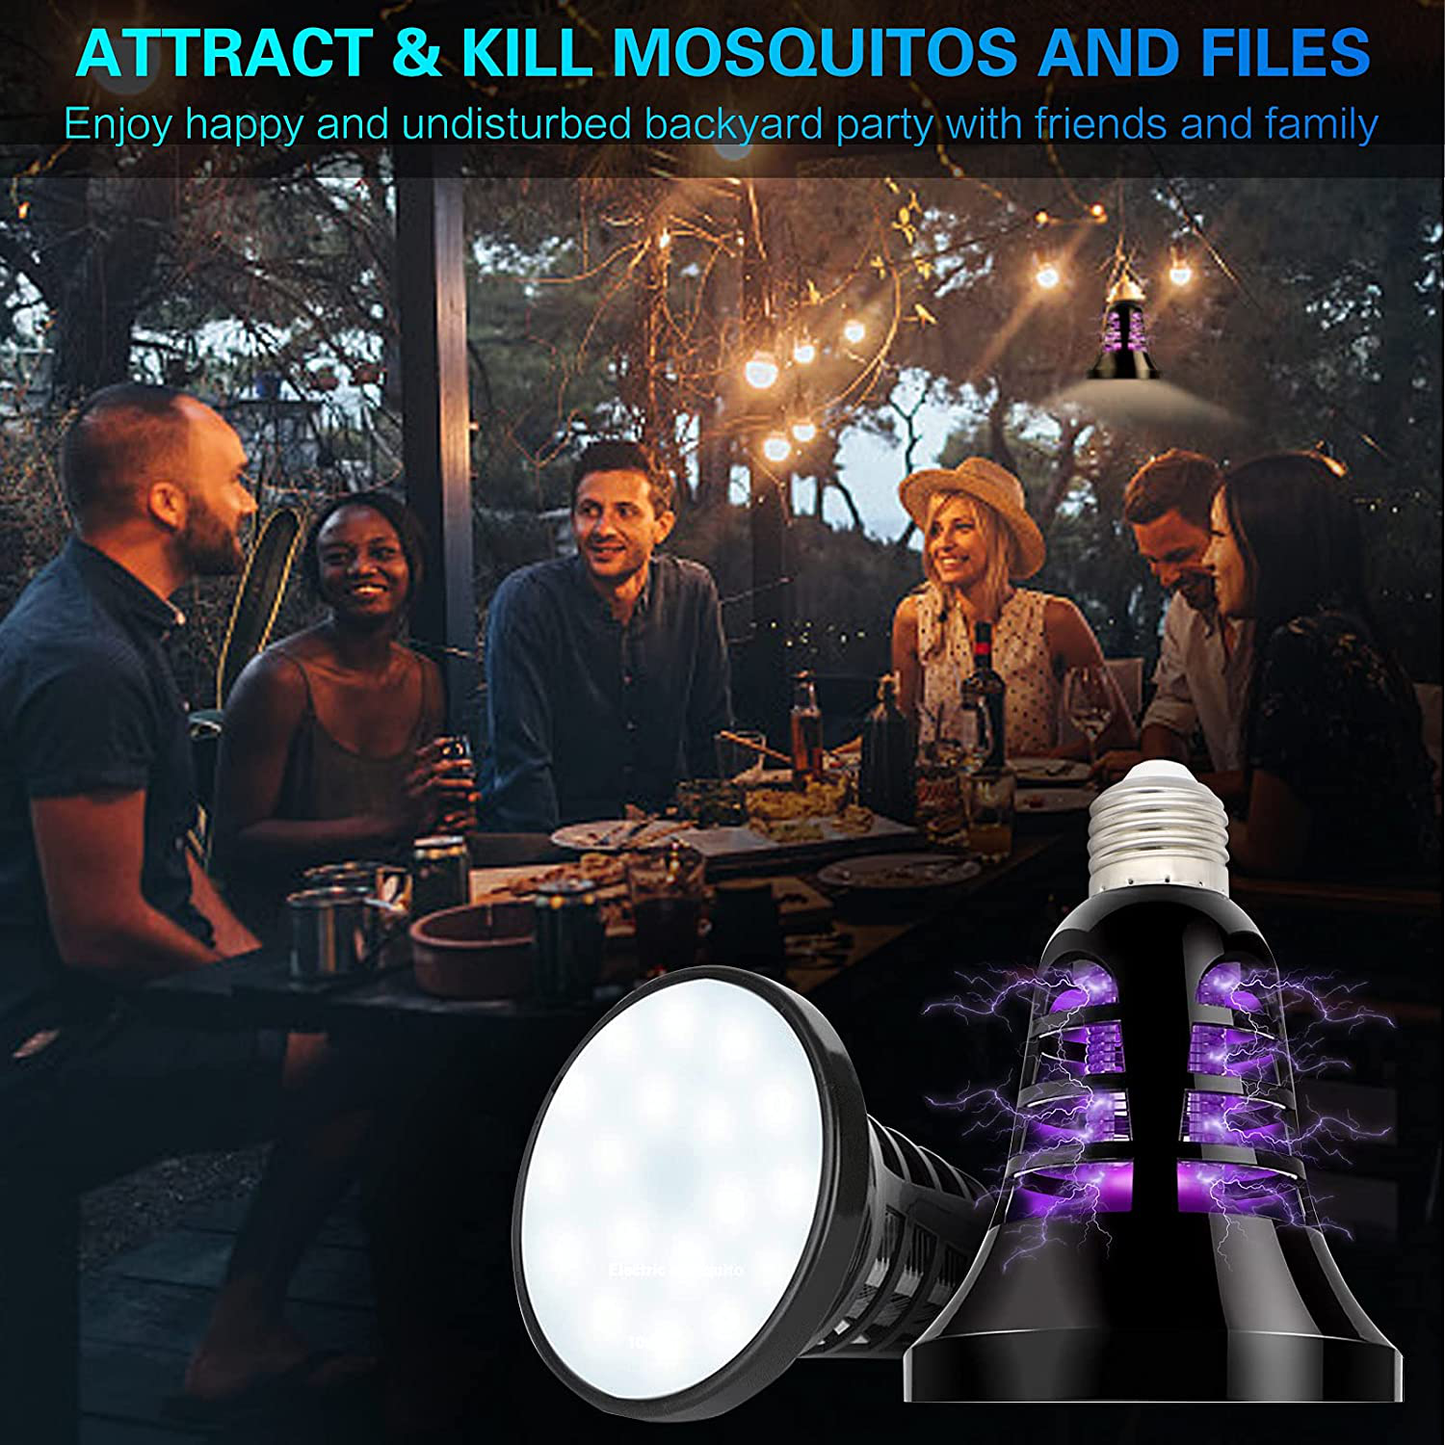 COZYLIFE Bug Zapper Light Bulb,2-in-1 UV Mosquito Killer Lamp Indoor LED Light Suitable for E26/E27 Light Bulb Socket,Electric Fly Insect Trap Chemical-Free for Home Kitchen Backyard Patio